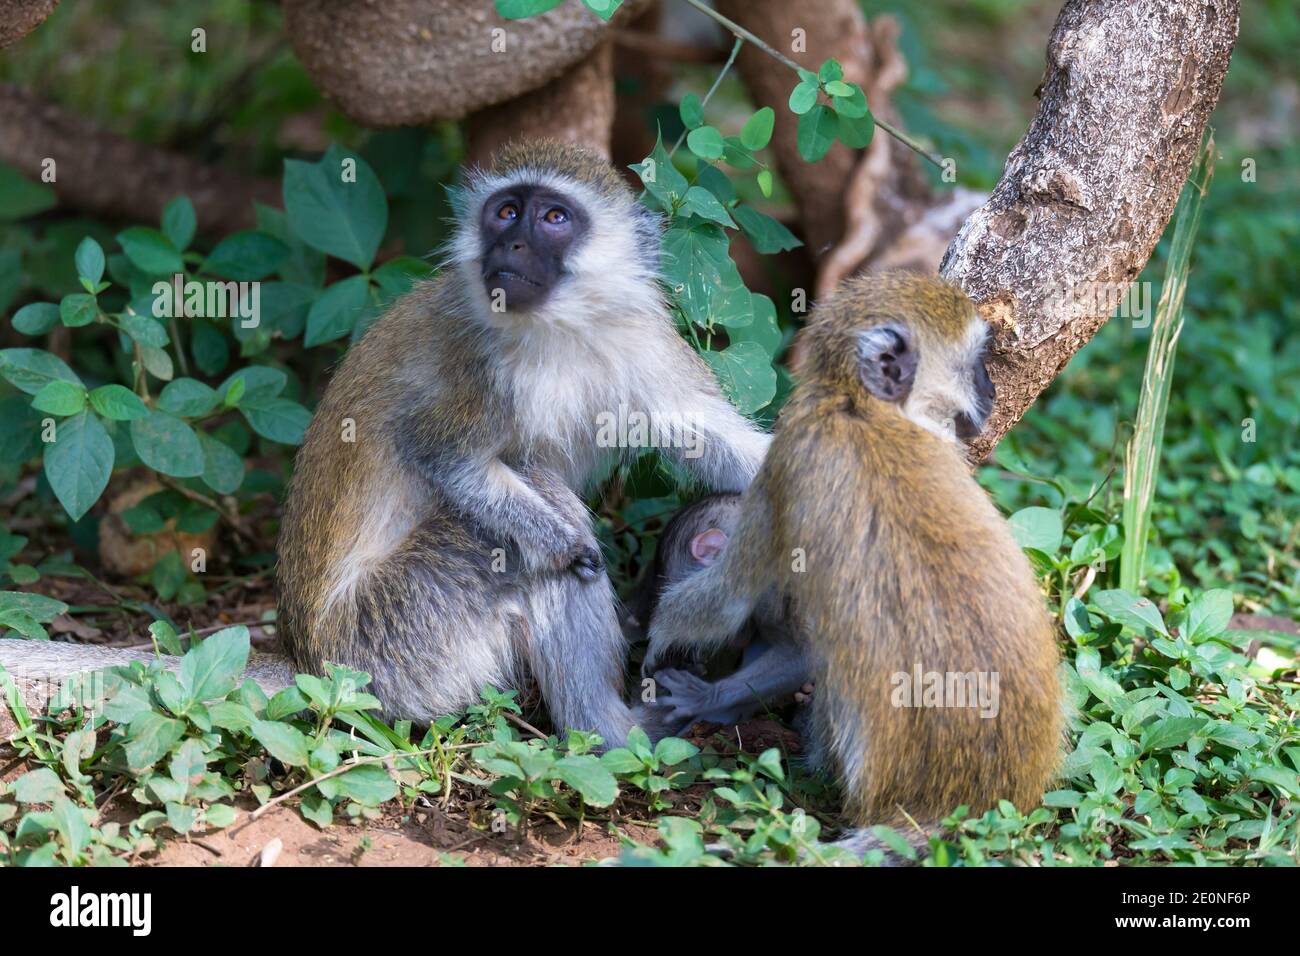 Vervet family with a little baby monkey. Stock Photo